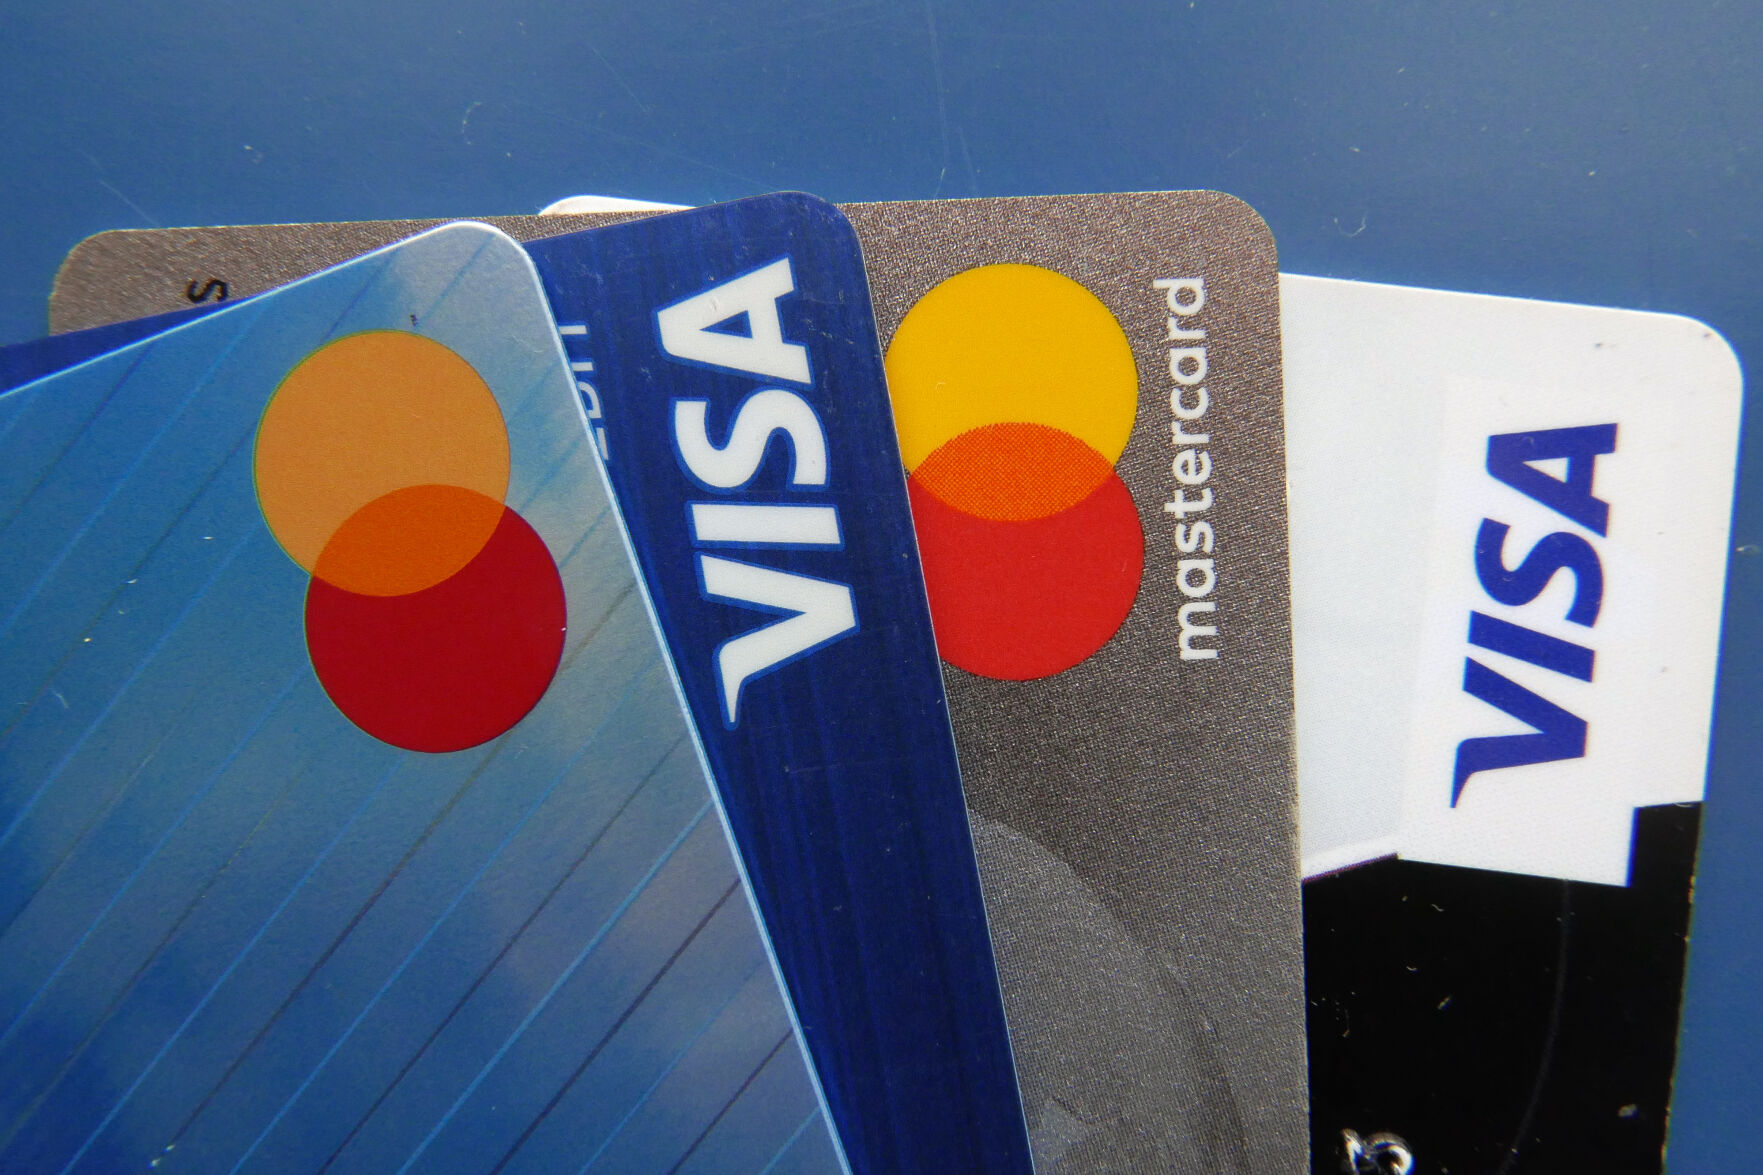 <p>FILE - Credit cards as seen July 1, 2021, in Orlando, Fla. Many Americans say their household expenses are outpacing earnings in 2023 according to a new poll from AP-NORC Center for Public Affairs Research. (AP Photo/John Raoux, File)</p>   PHOTO CREDIT: John Raoux - staff, ASSOCIATED PRESS